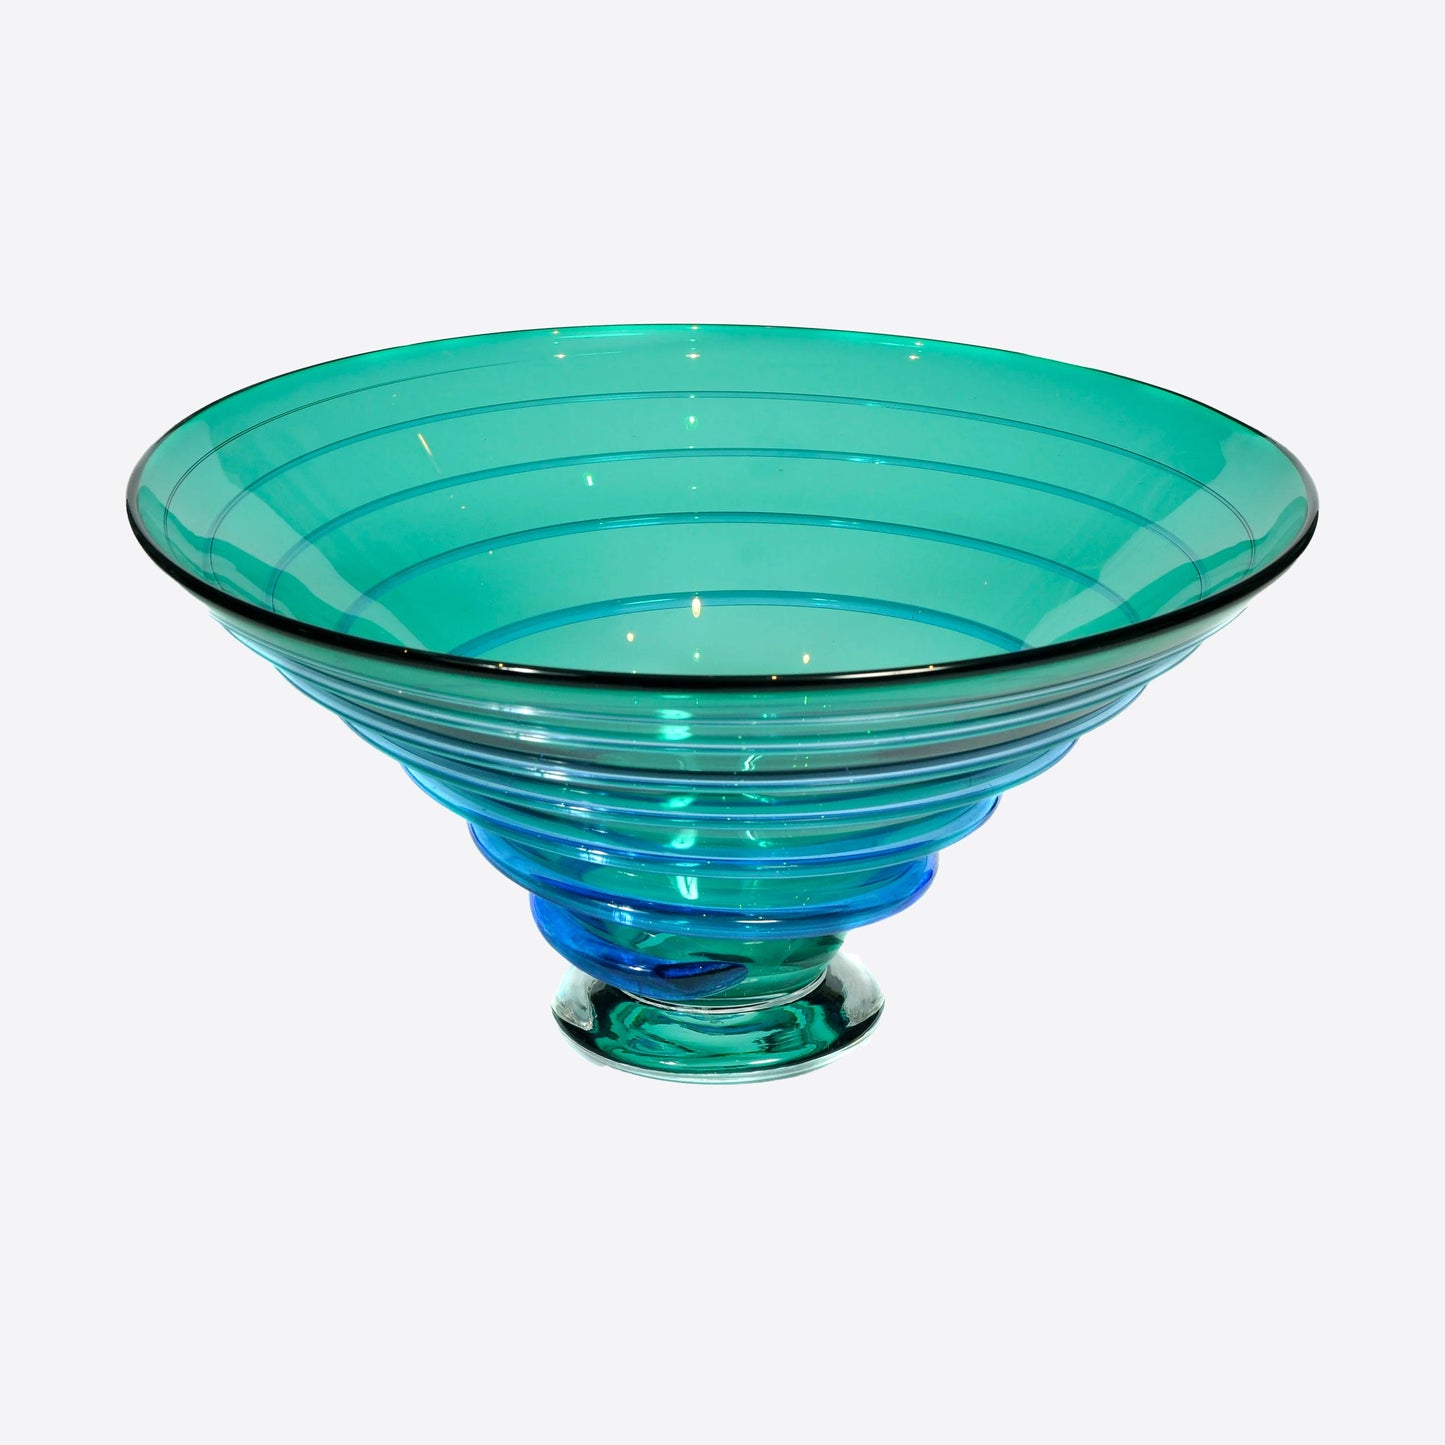 Aqua Spiral Bowl Not specified